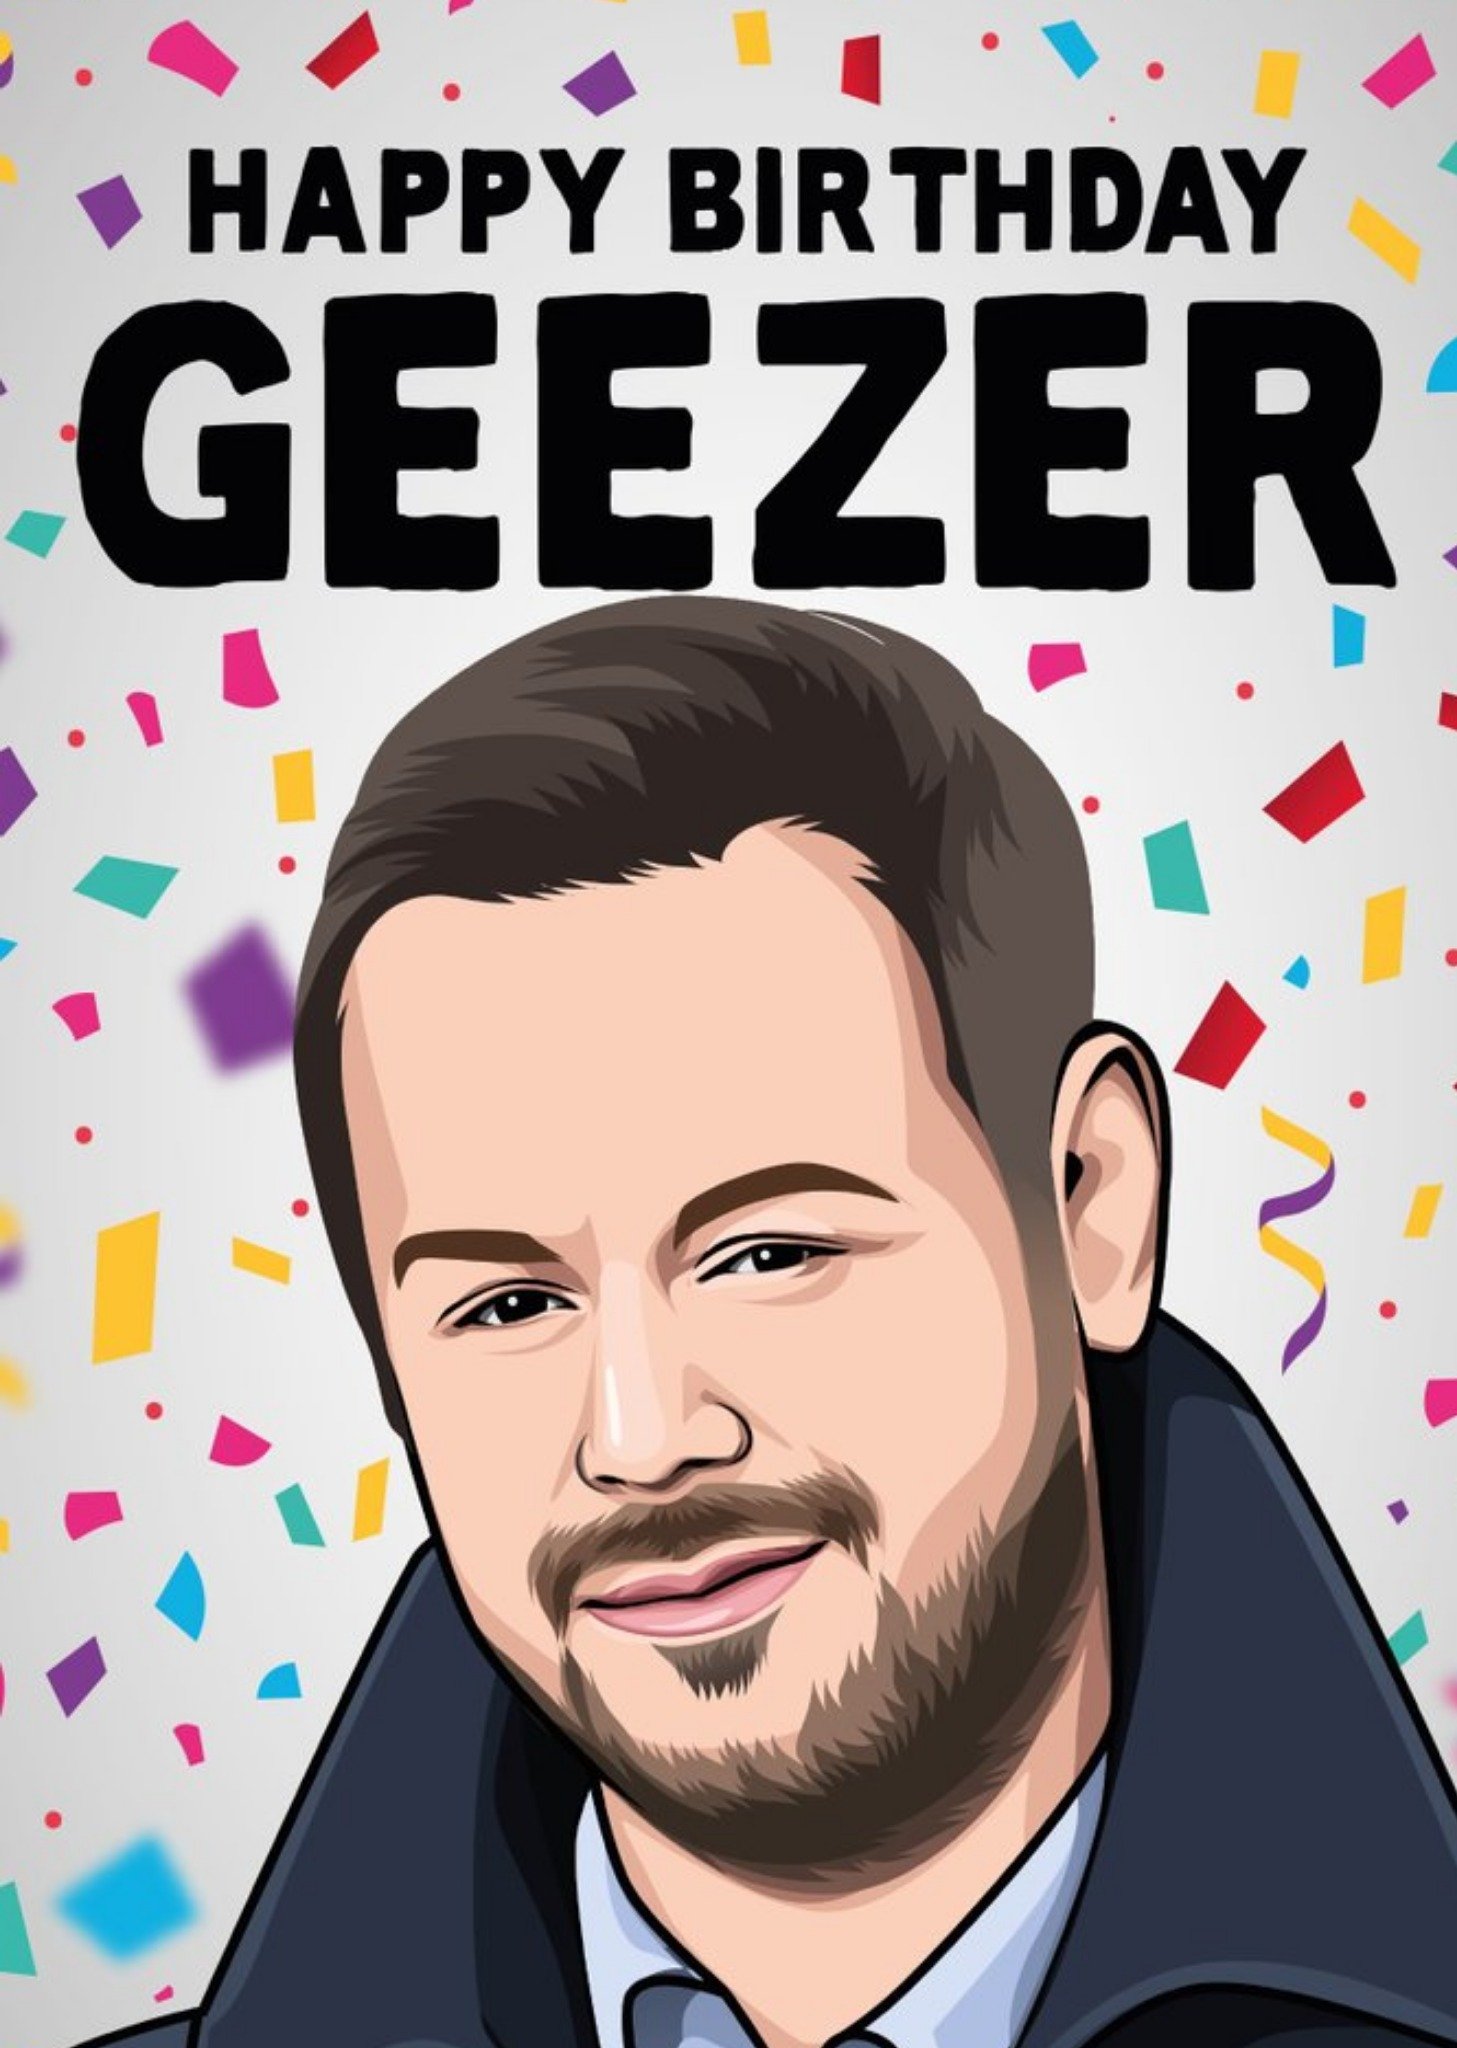 All Things Banter Happy Birthday Geezer Spoof Celeb Card, Large